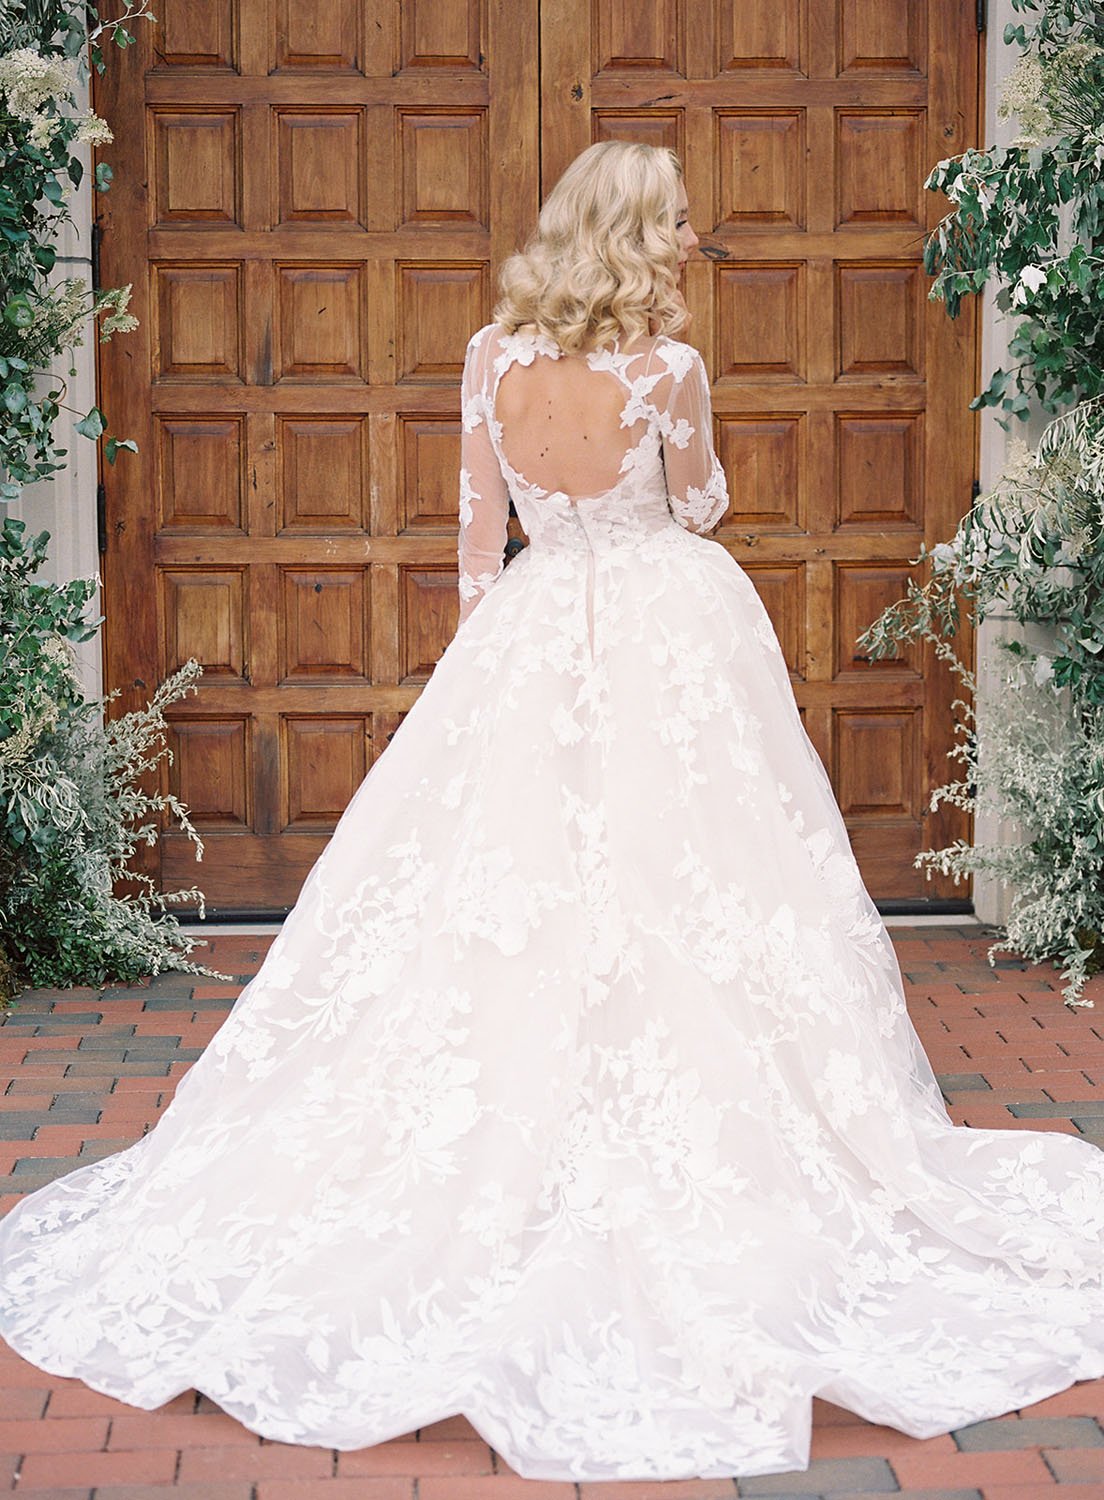  a bride wearing 'Maeve' by Monique Lhuillier wedding dress standing in front of regal double doors at a Villa in Wisconsin for a spring wedding 